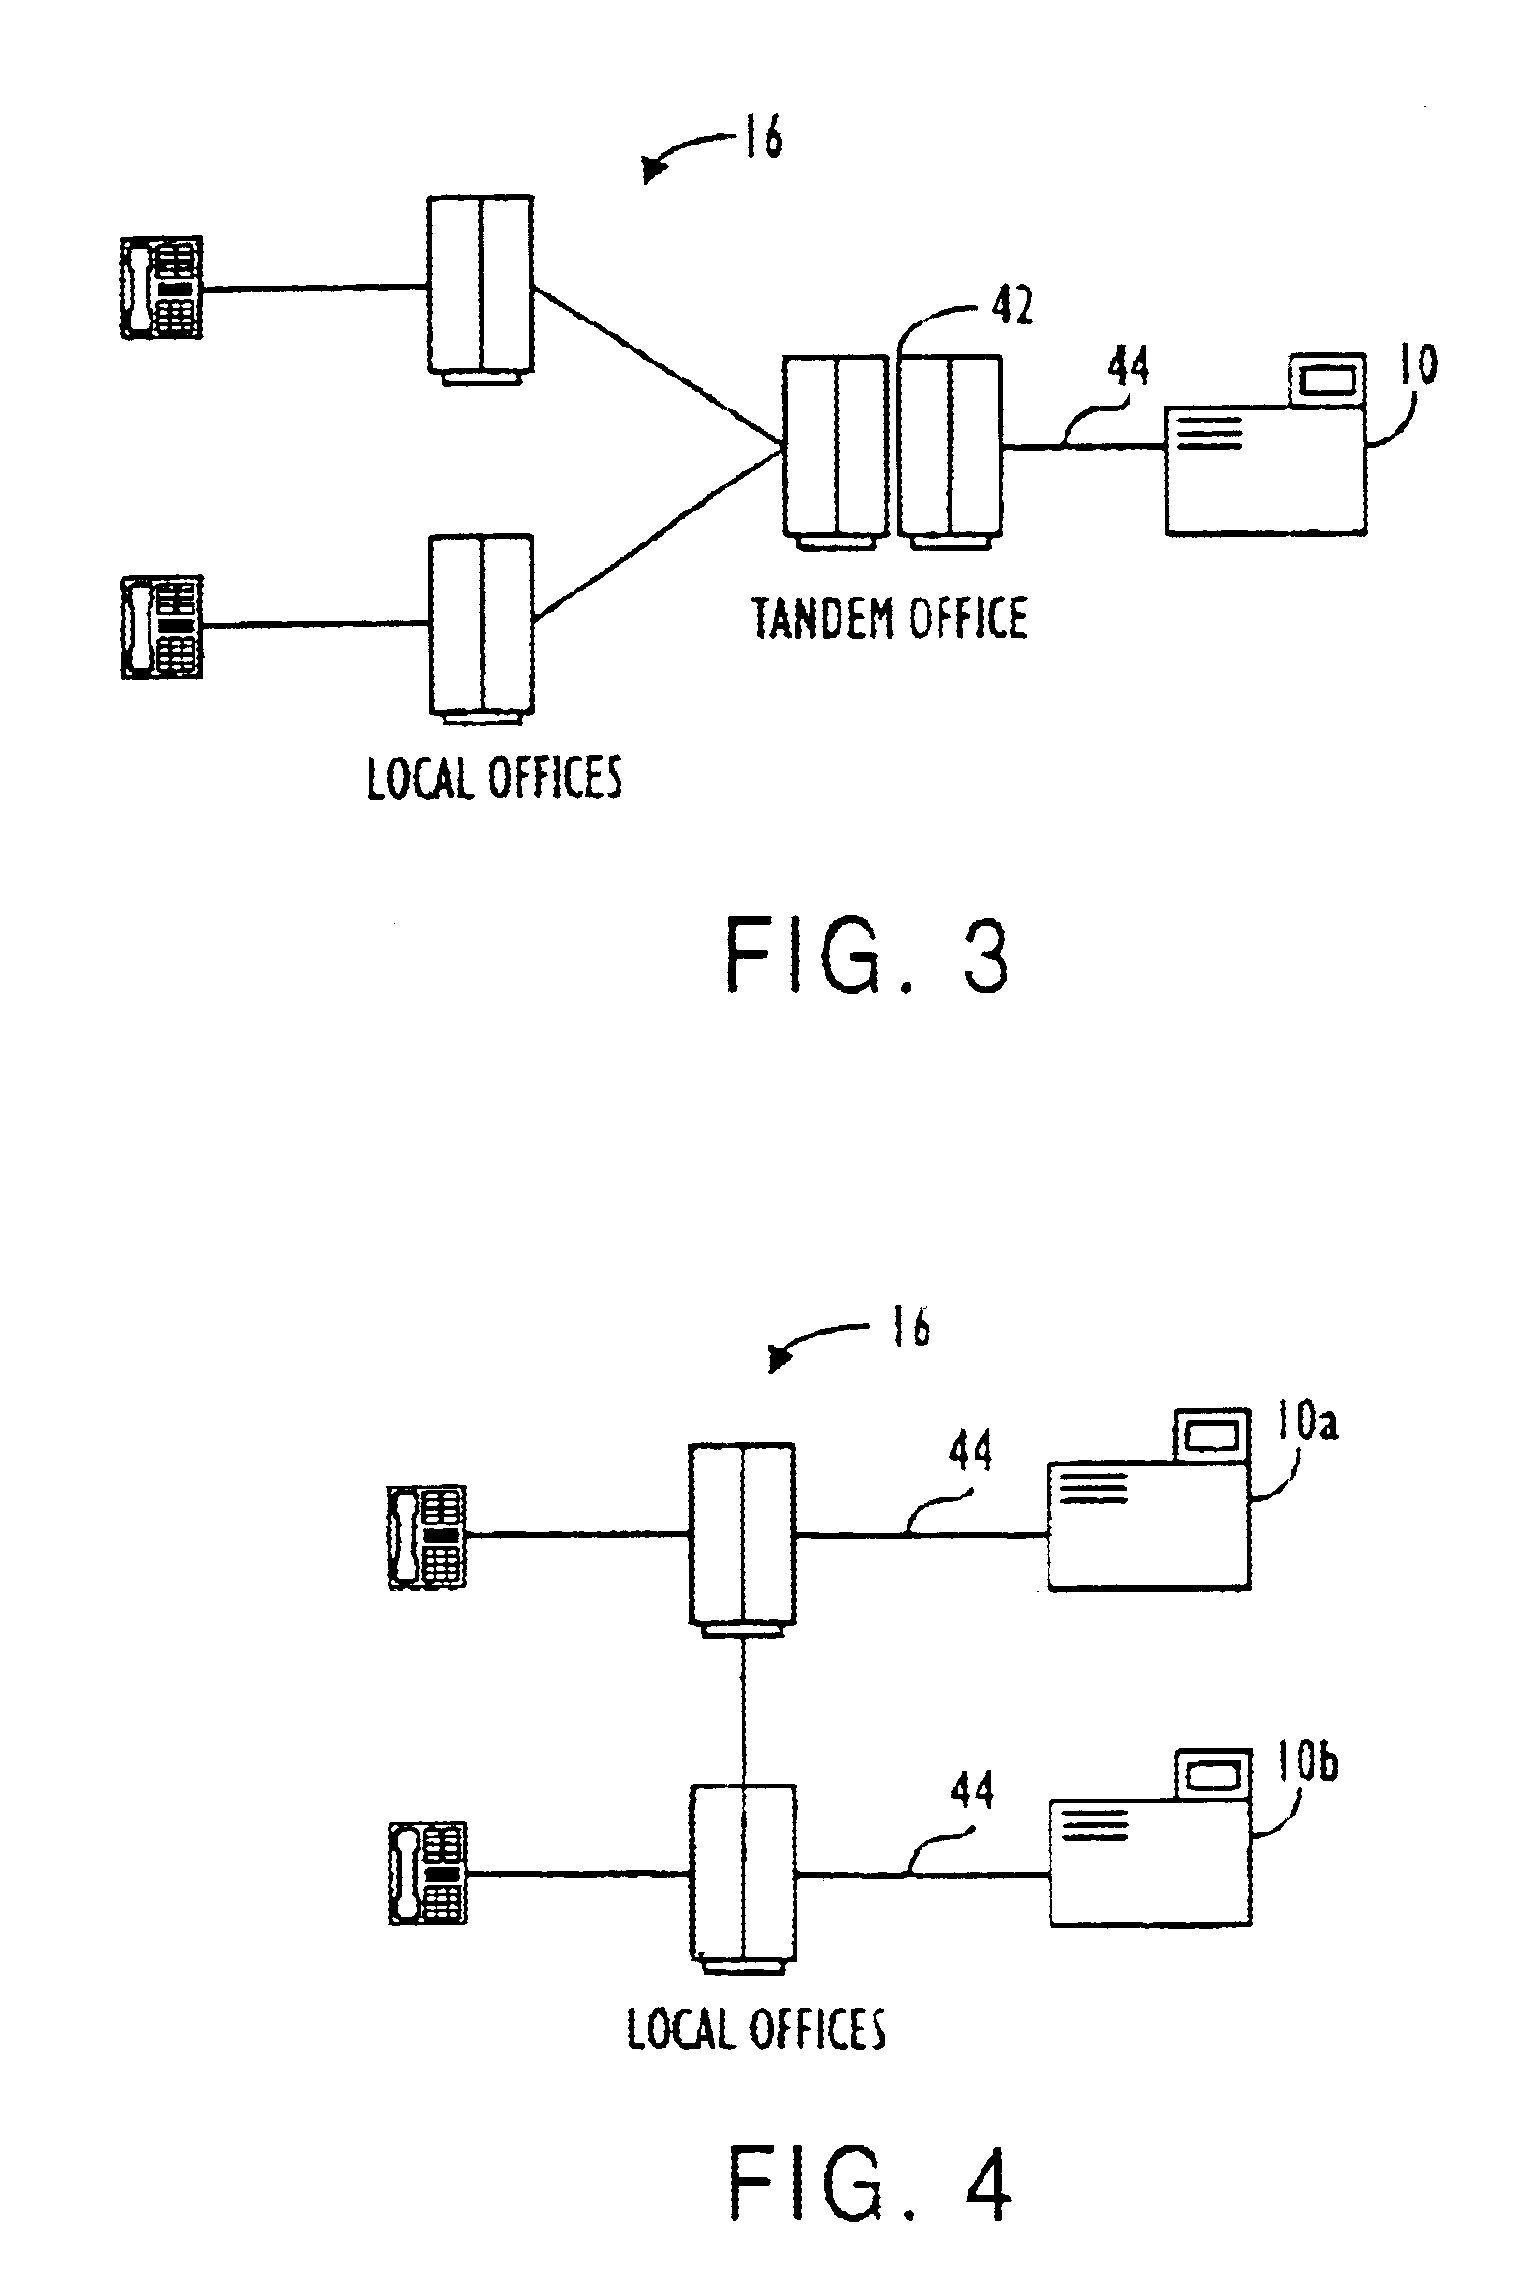 Flexible network platform and call processing system